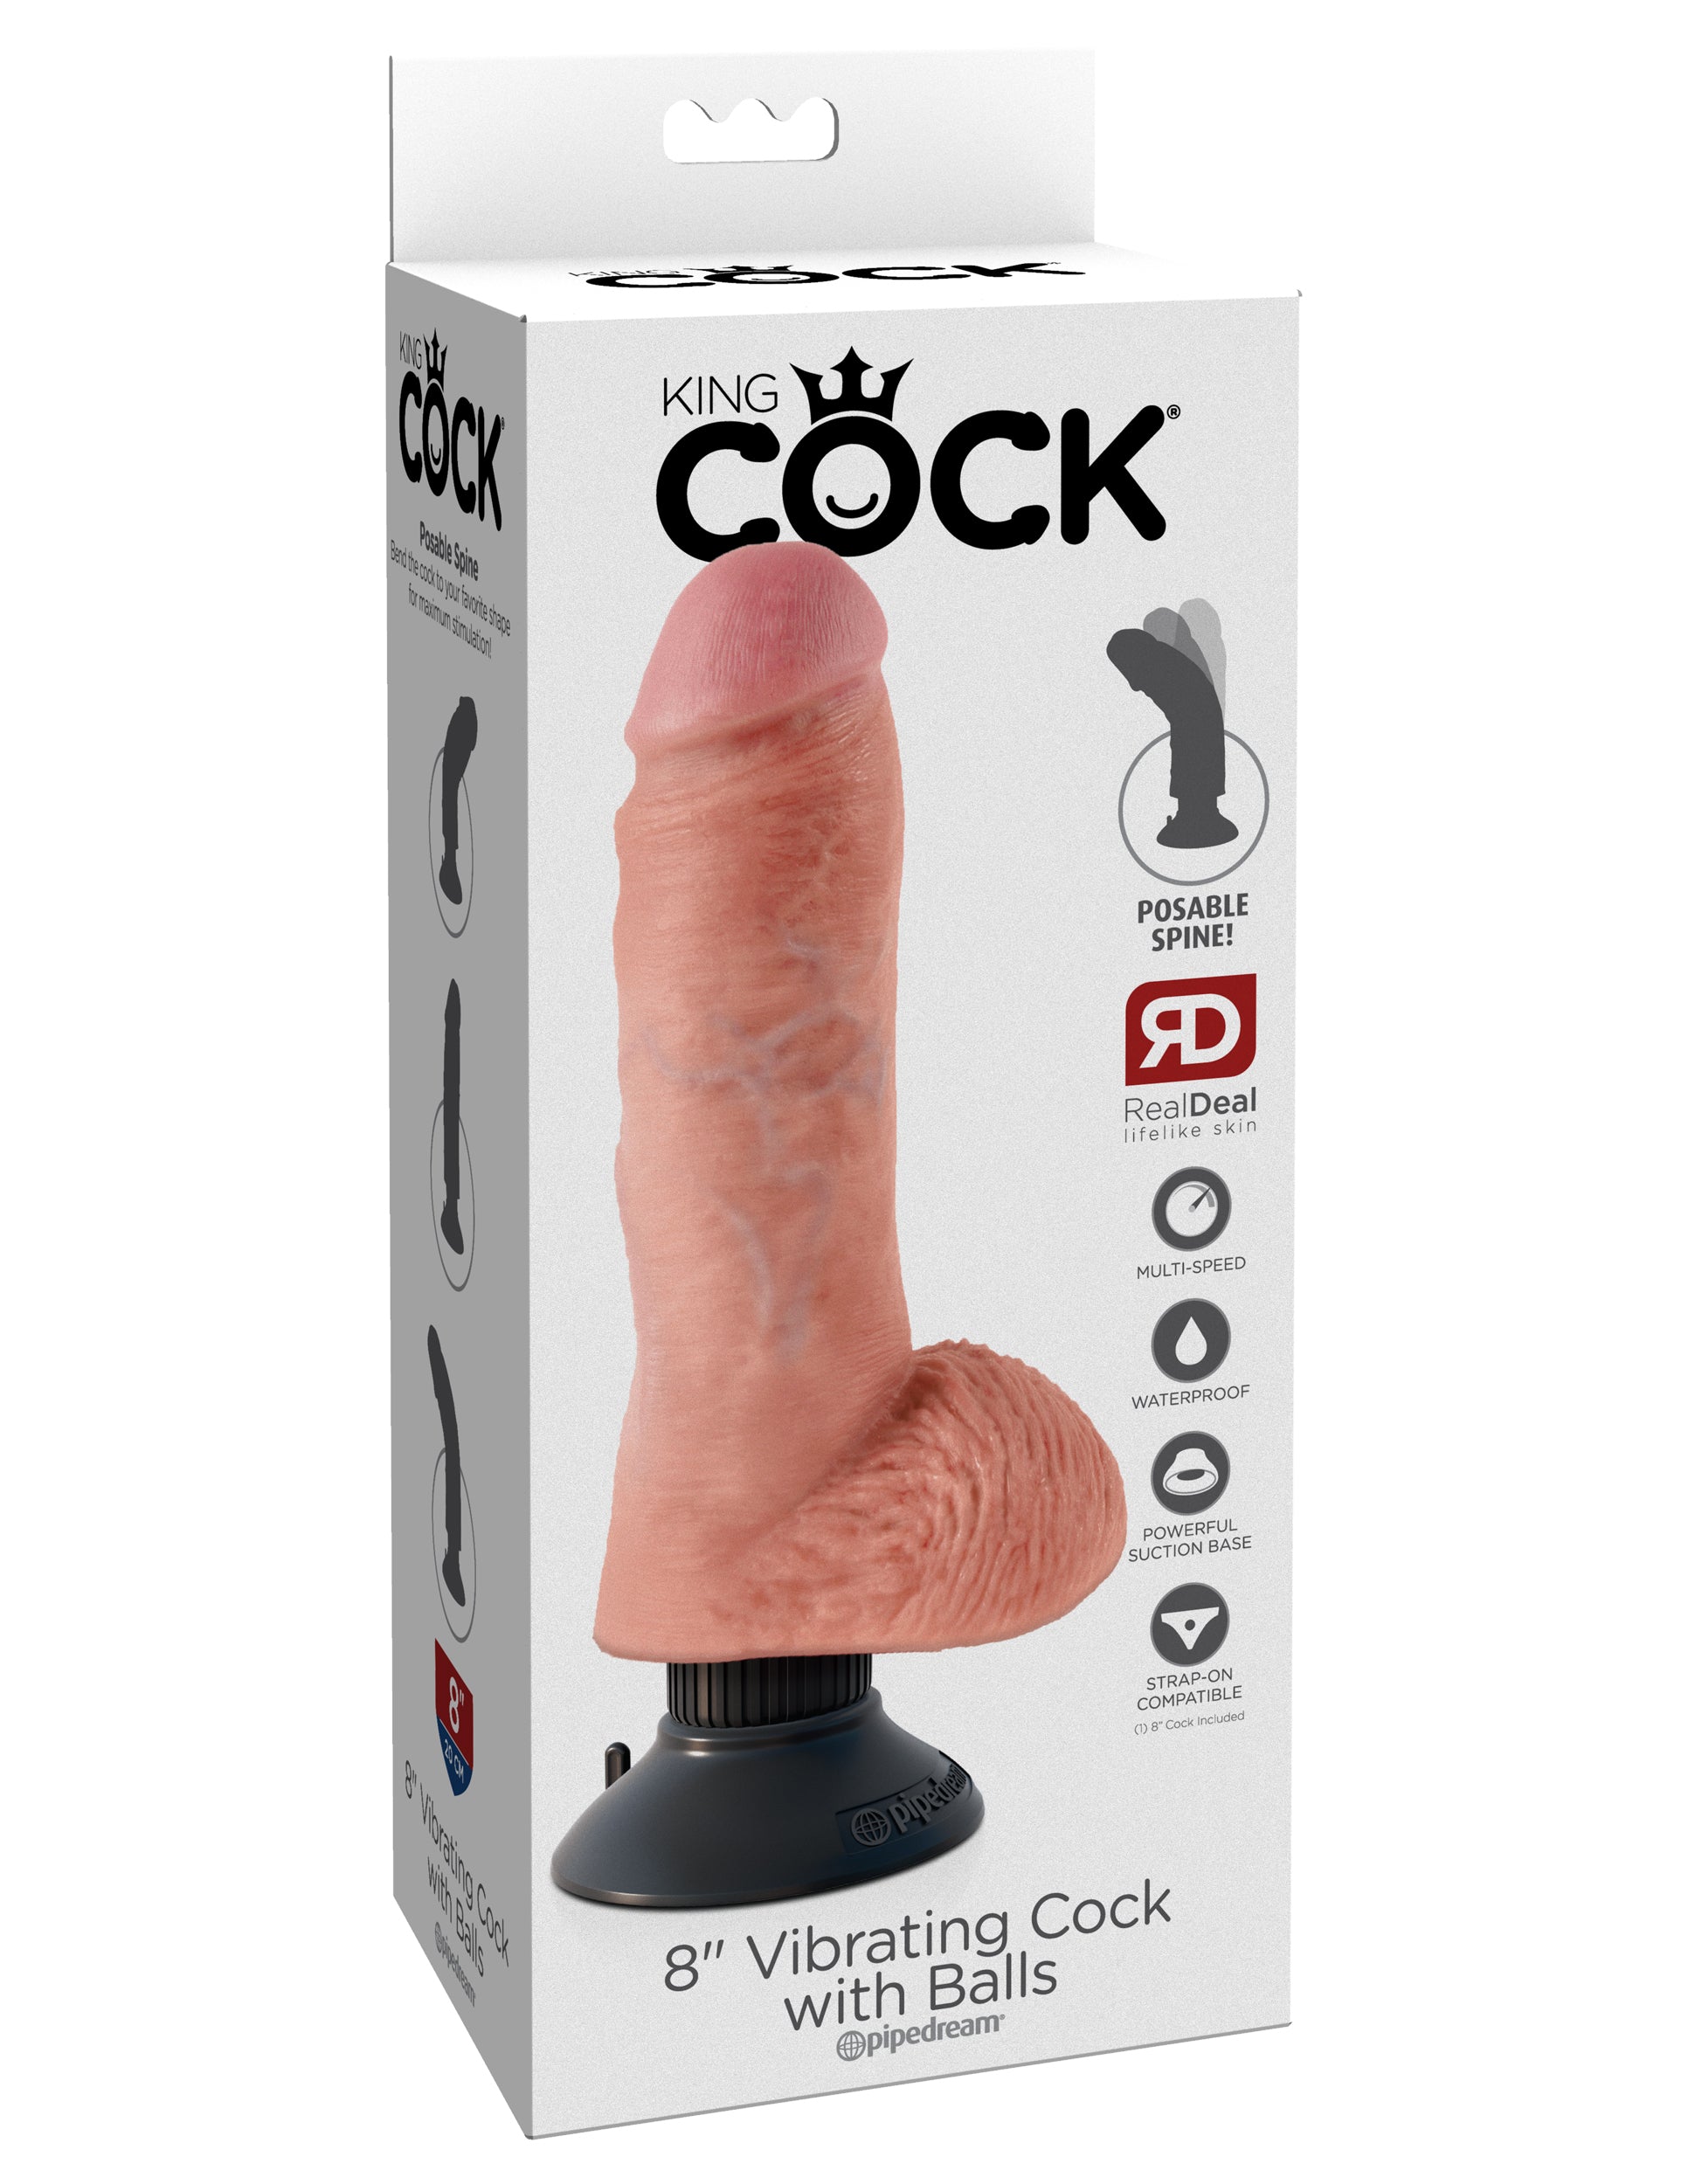 King Cock 8-Inch Vibrating Cock With Balls - Flesh